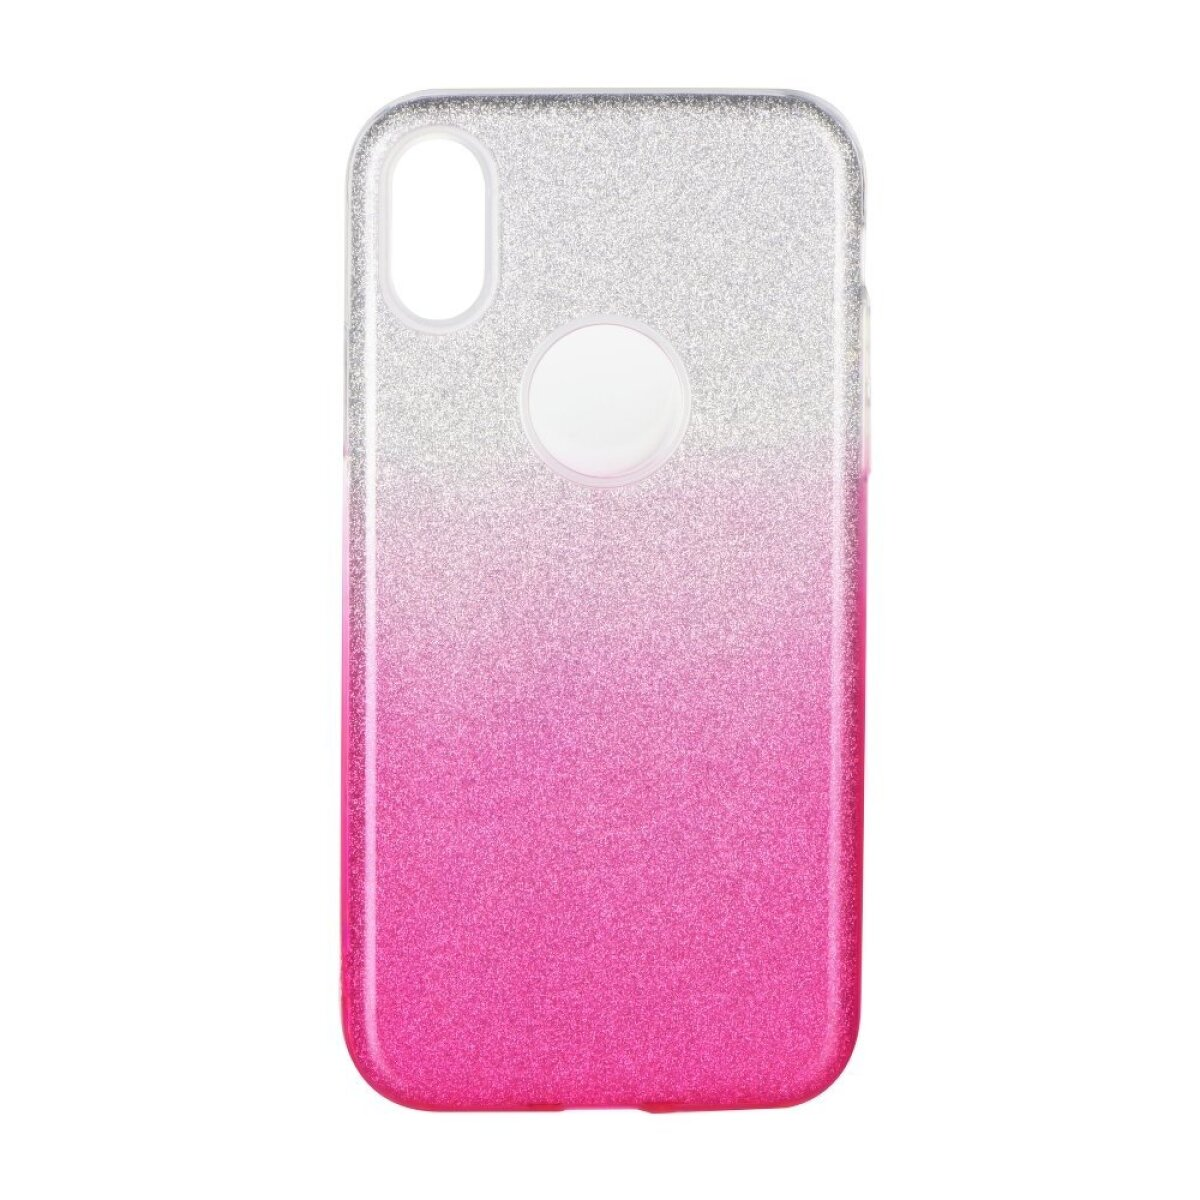 P40 LITE FORCELL P40 Cover, Huawei, SHINING Huawei transparent/rosa, Pink Full Lite,